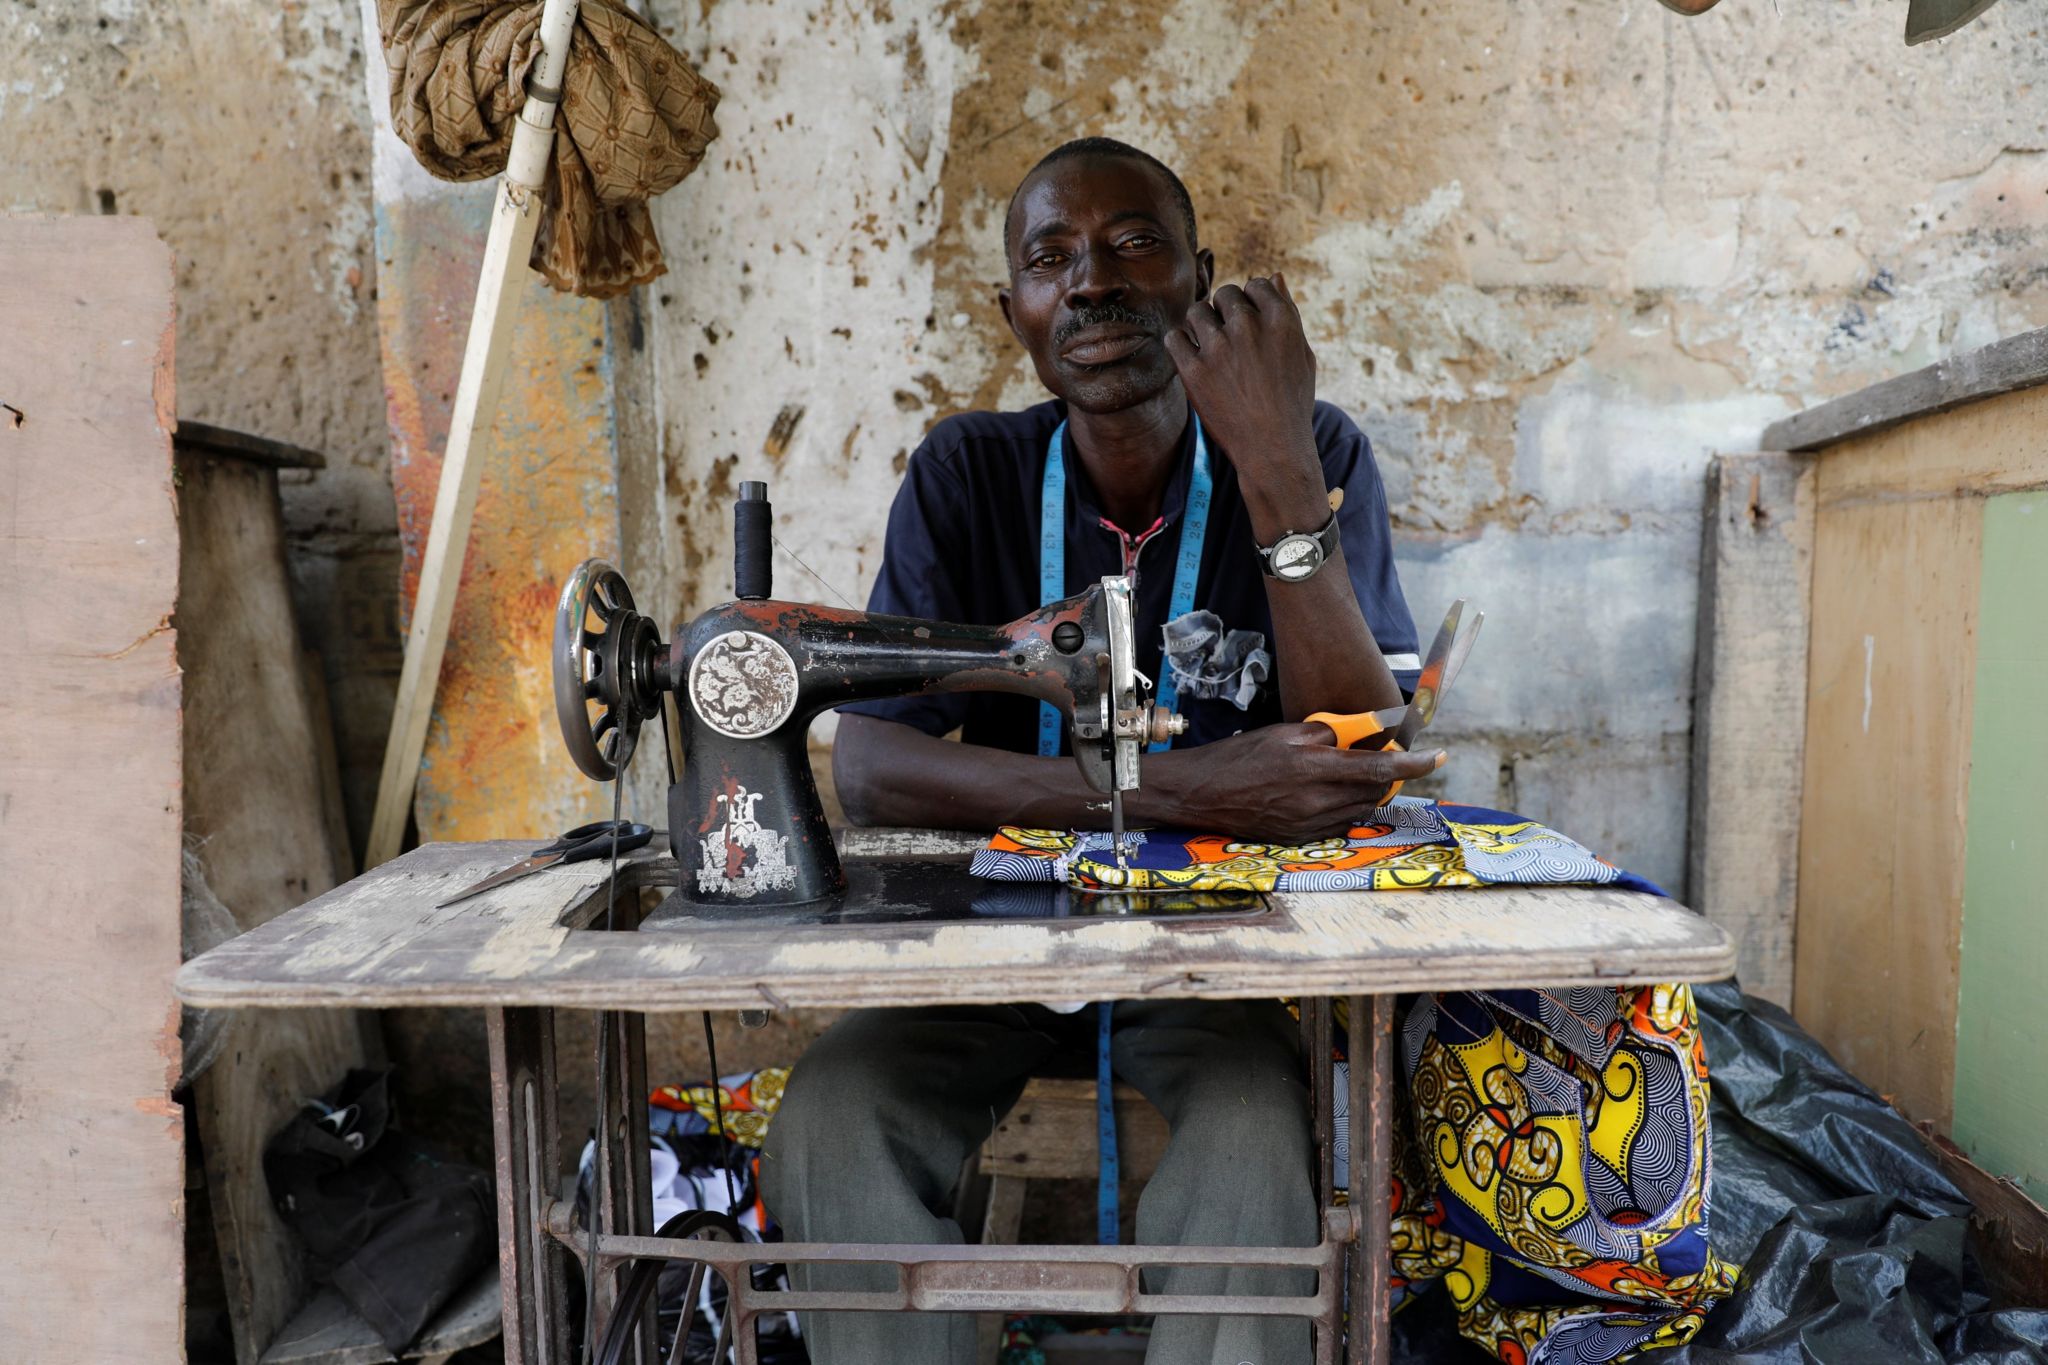 Streetside tailor Ganiyu Oyinlola sits behind a sewing machine for a portrait photograph as he sews near a currency exchange market in Ikeja district in Lagos, Nigeria August 12, 2017.